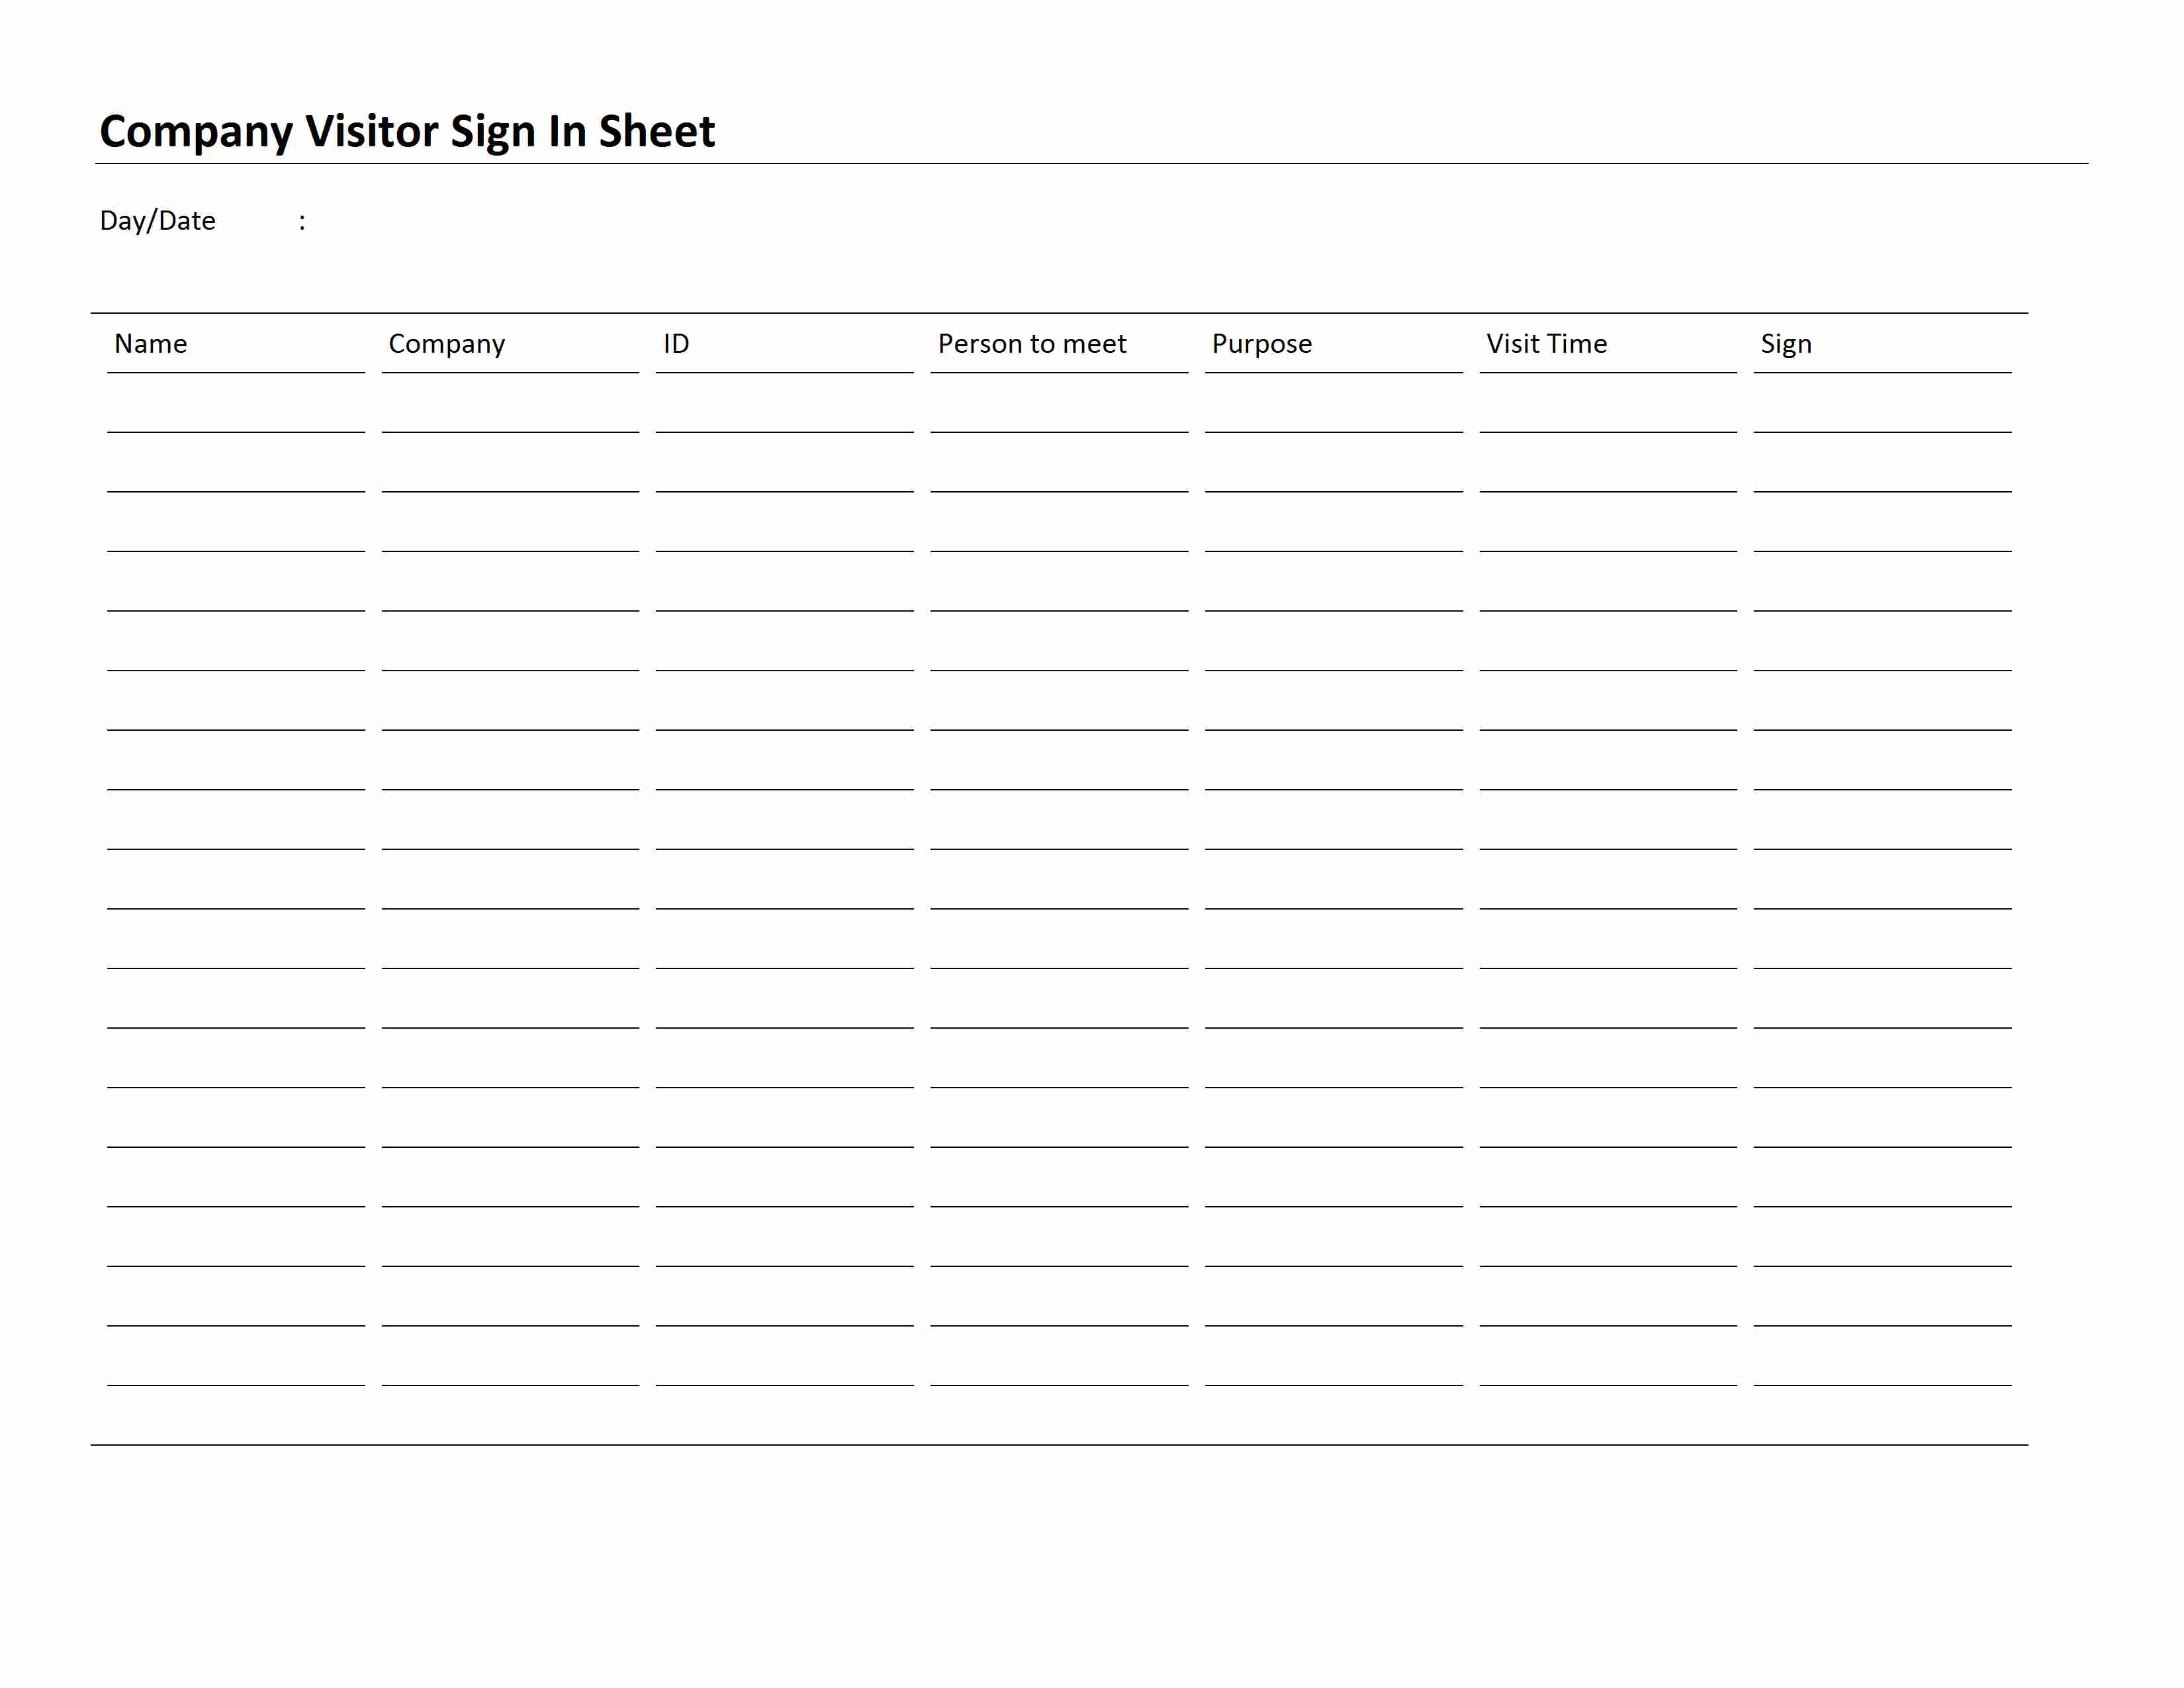 Company Visitor Sign In Sheet Template for Word